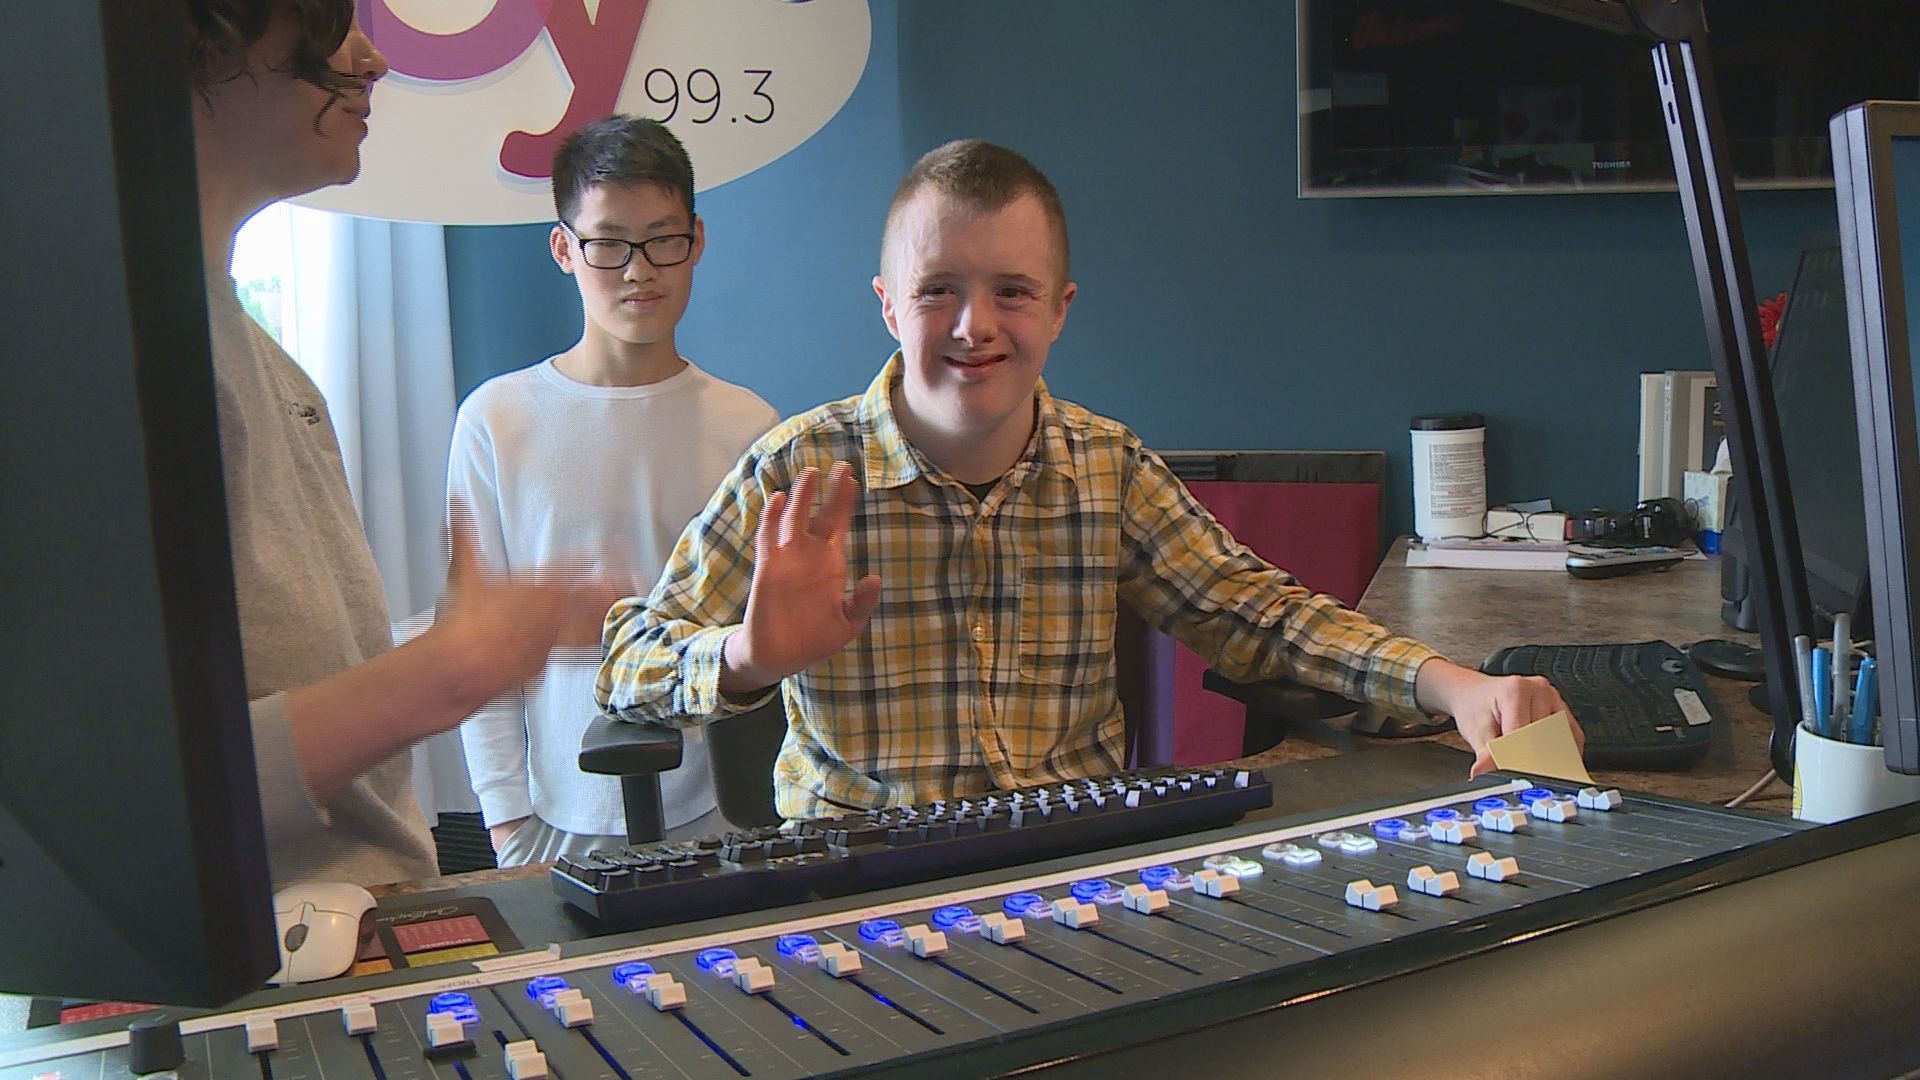 Eighth graders participating in the Inclusive Education Program at Zeeland Christian School visited Joy 99.3 on a unique field trip that highlights their passion.